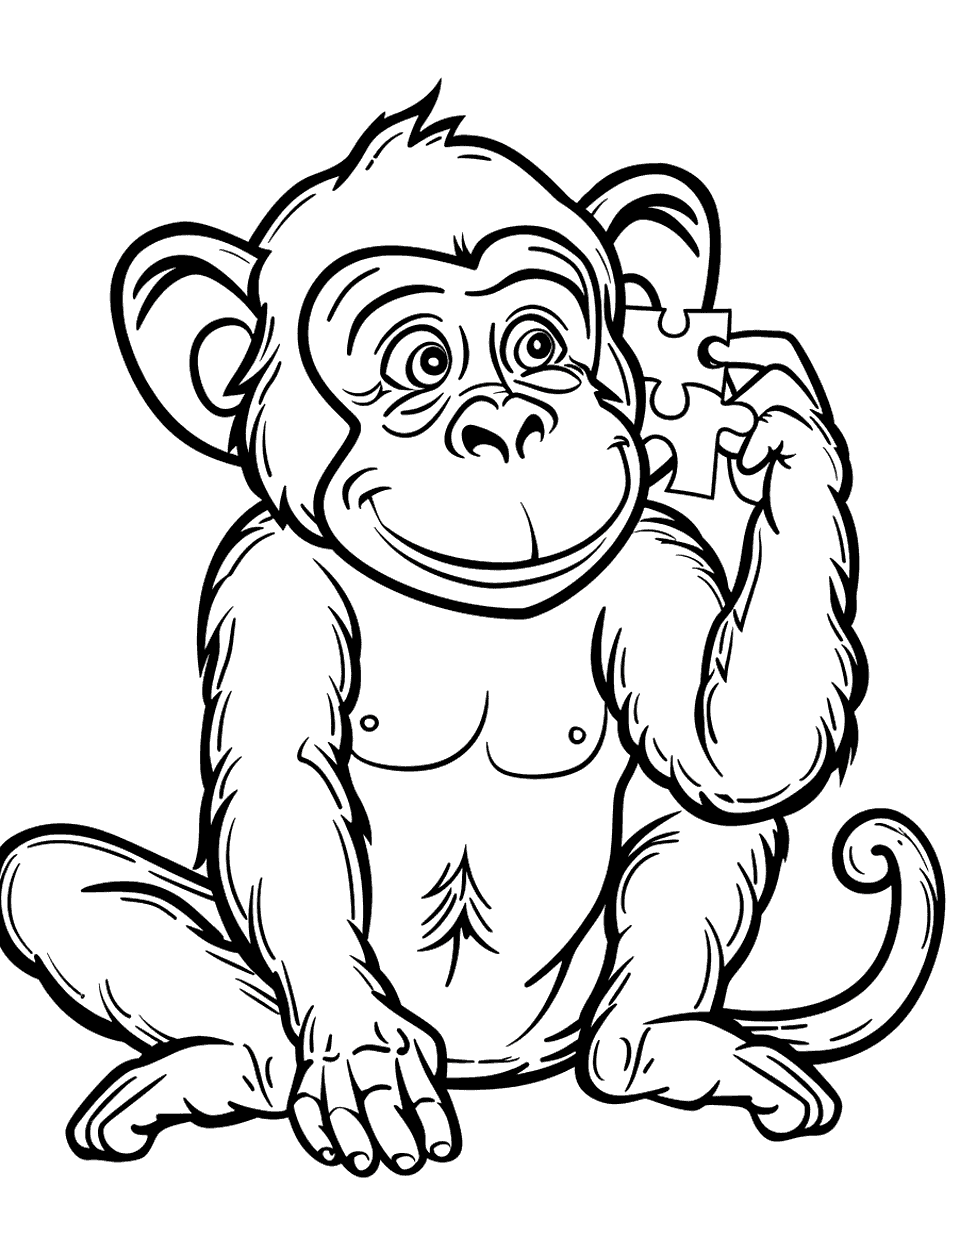 Monkey with a Puzzle Coloring Page - A monkey pondering over a simple jigsaw puzzle piece in its hands.